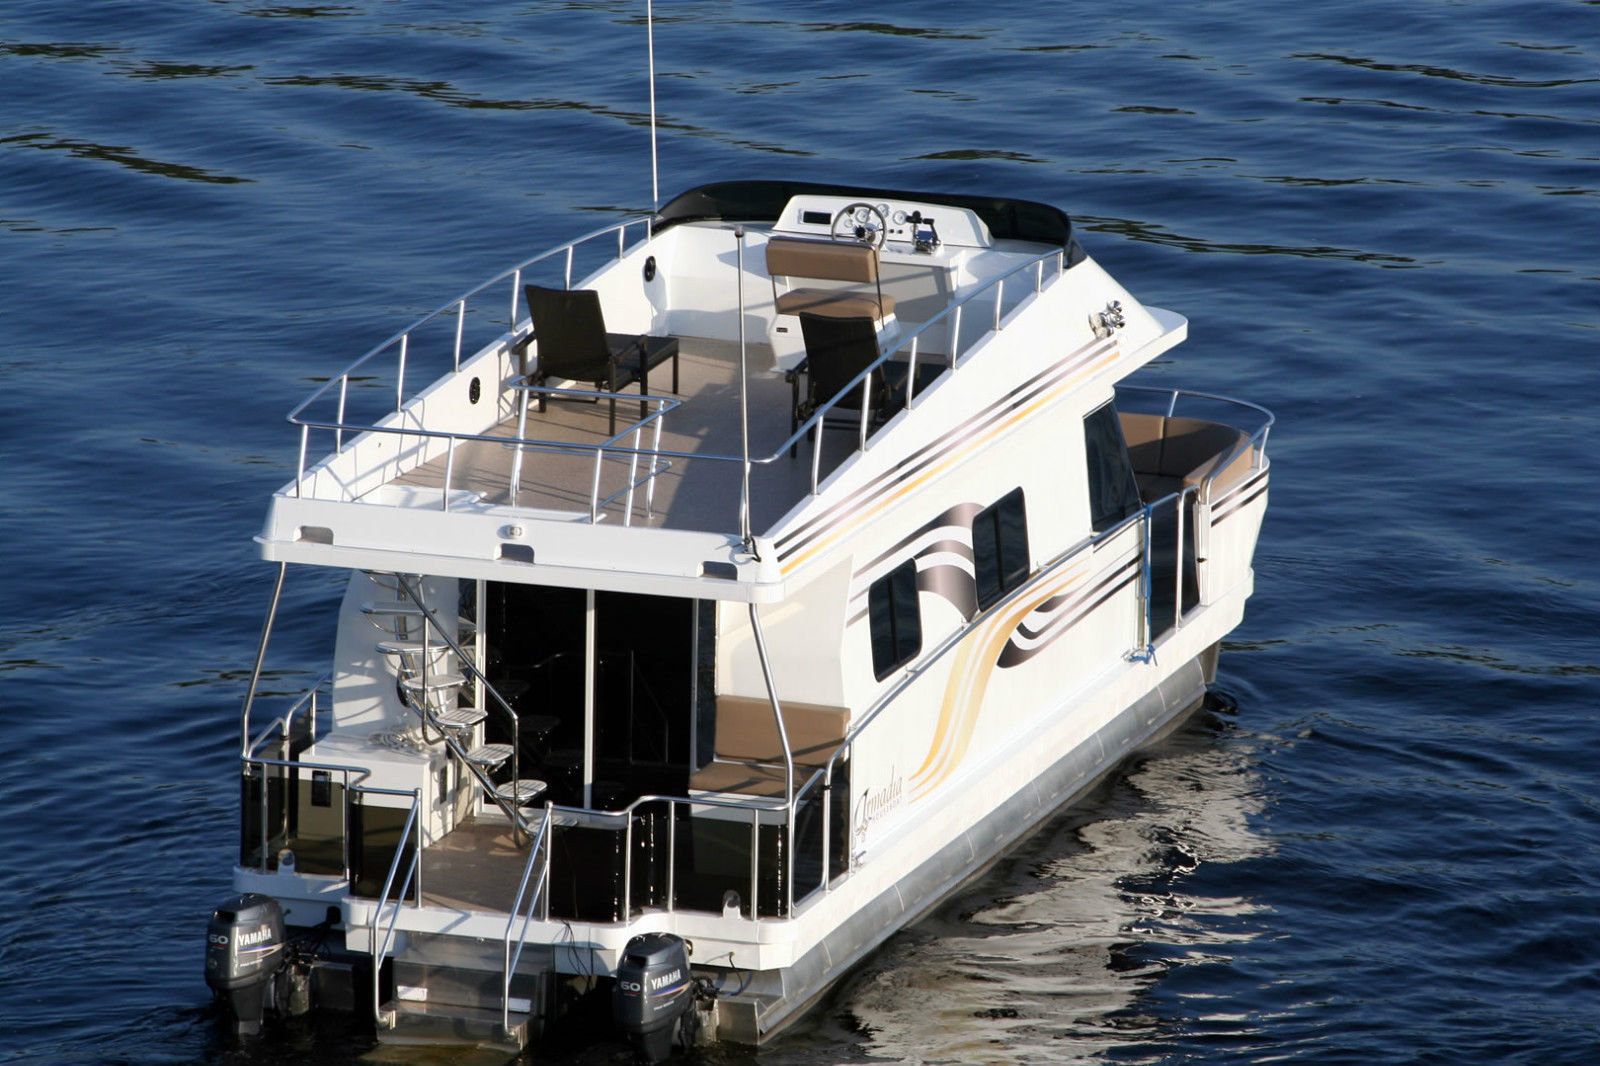 armadia pontoon houseboat 2012 for sale for 9,000